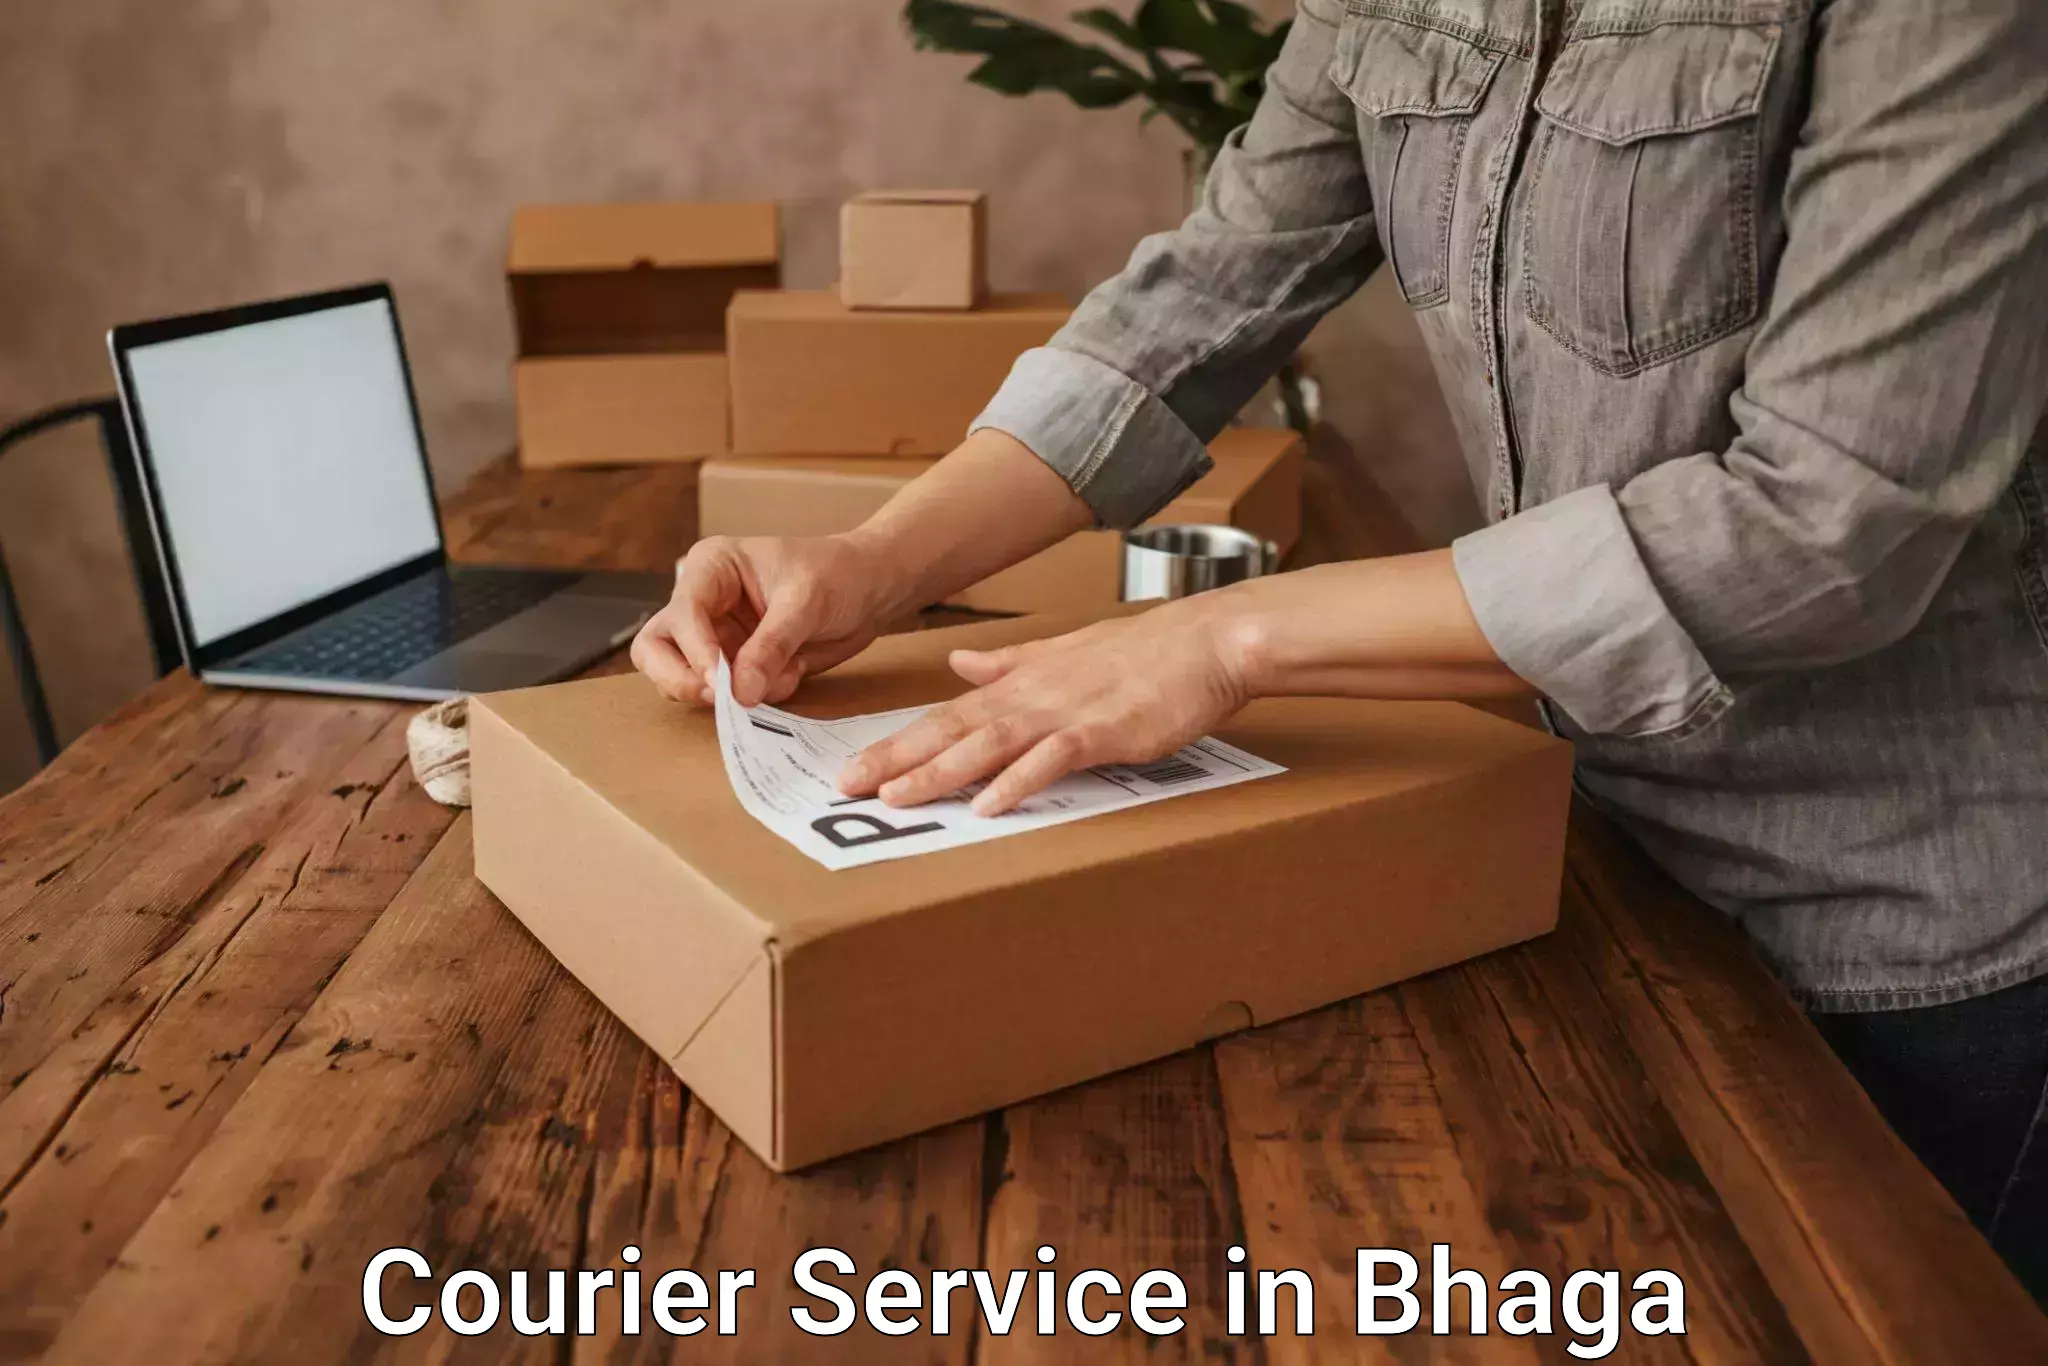 Express mail solutions in Bhaga